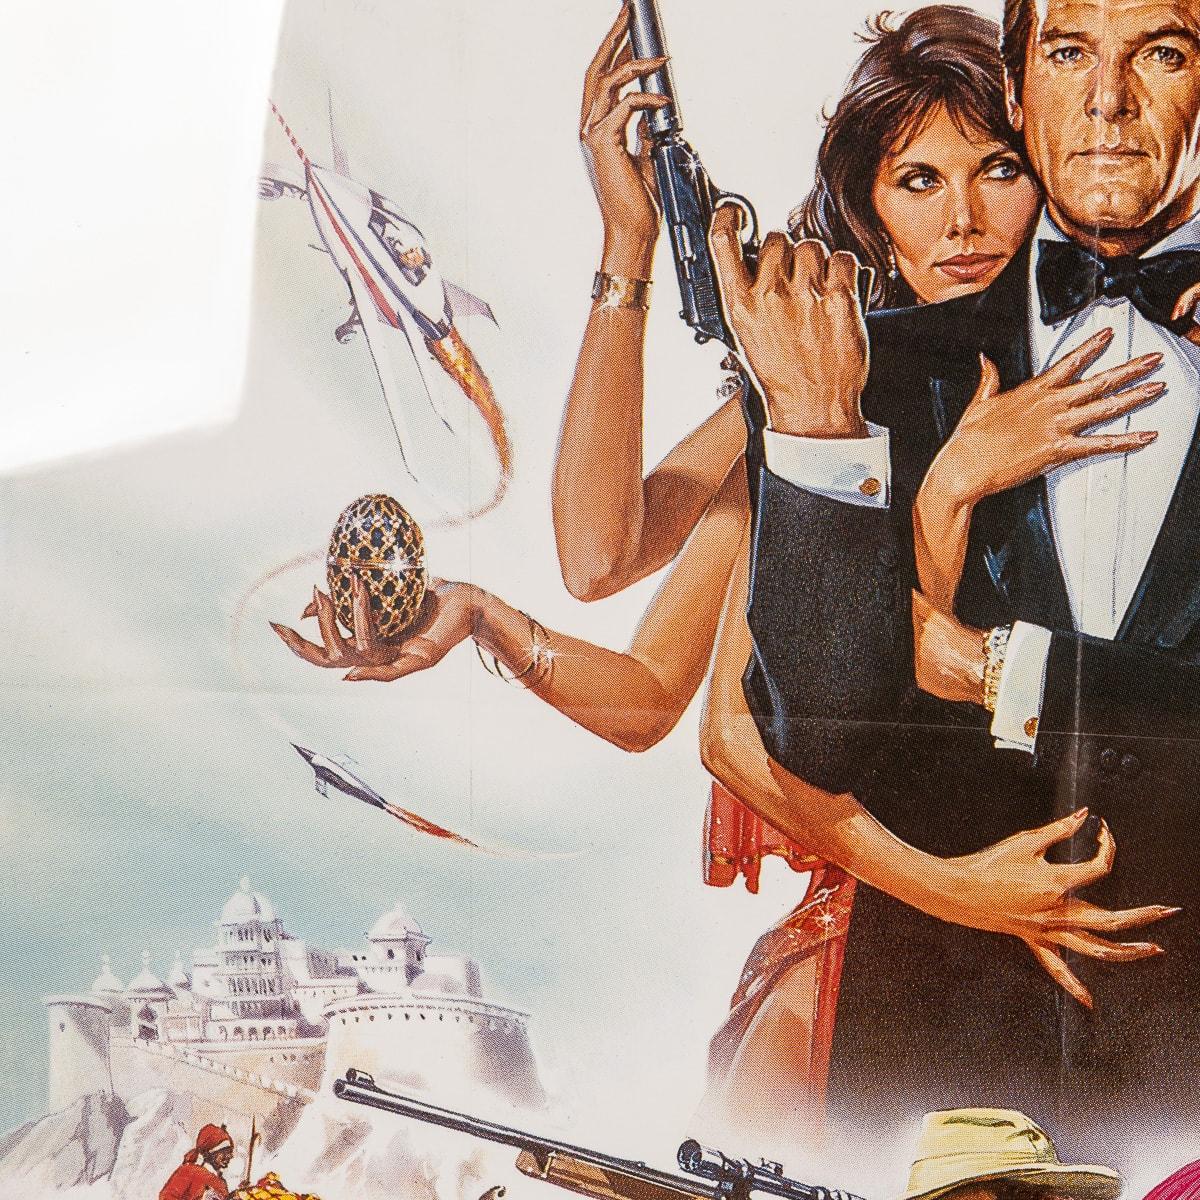 Original French Release James Bond 'Octopussy' Poster, c.1983 For Sale 3